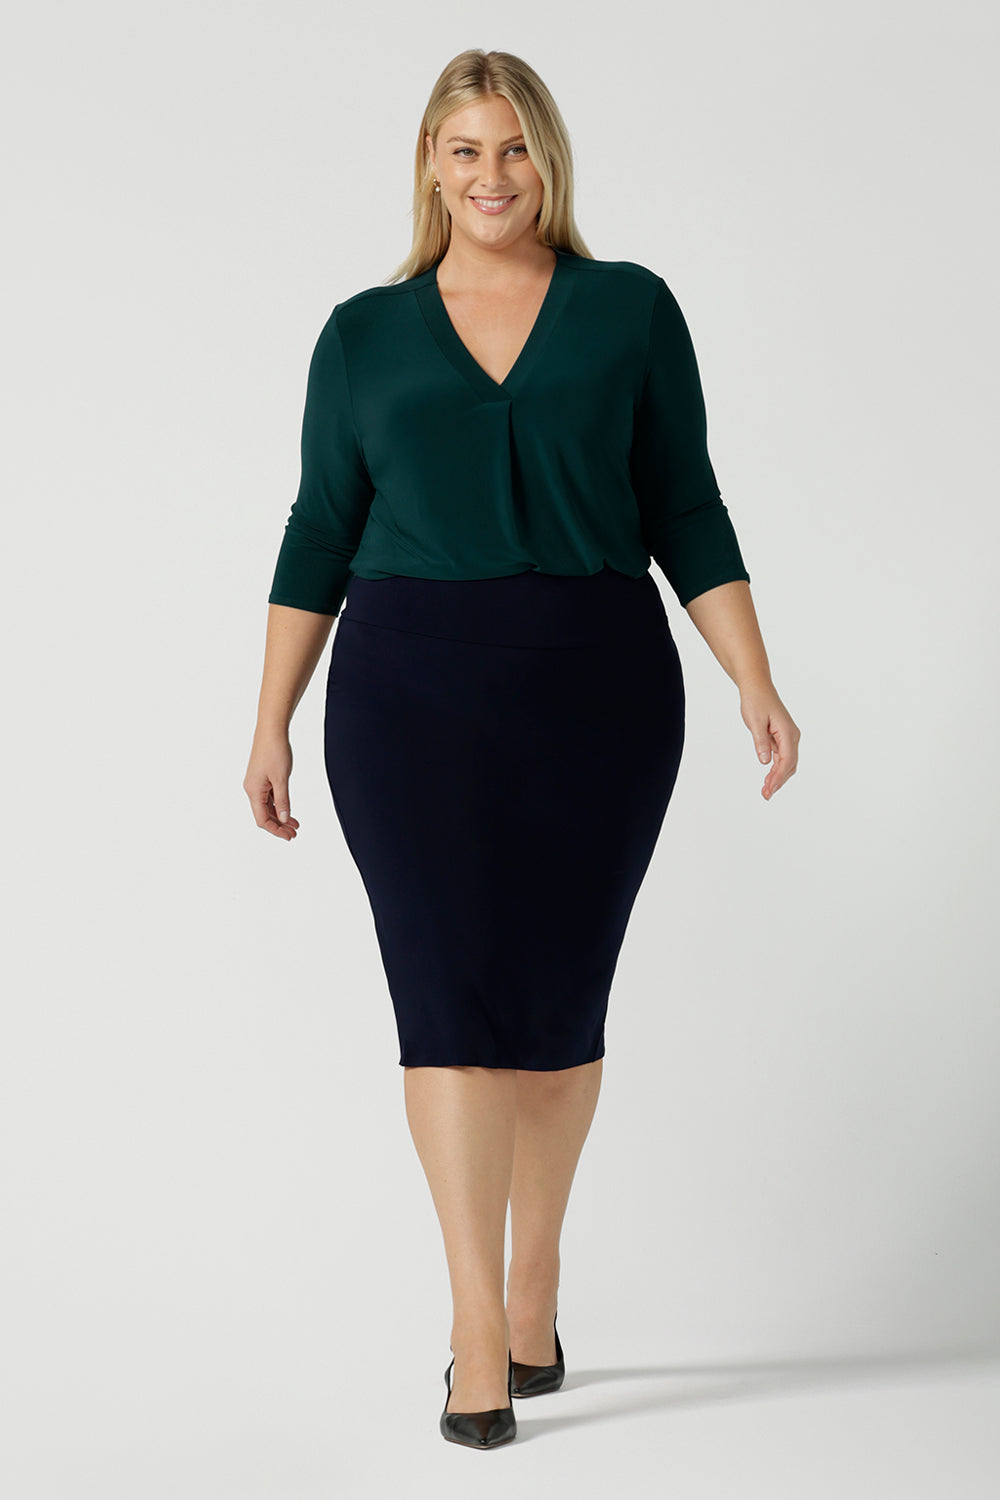 A size 18 woman wears the Jaime Top in Alpine with a soft pleated neckline and 3/4 sleeves. A fitted Andi skirt in Navy. Easy care jersey that is perfect for work to weekend. Made in Australia for women size 8 - 24. Styled back with black sling back pumps. 